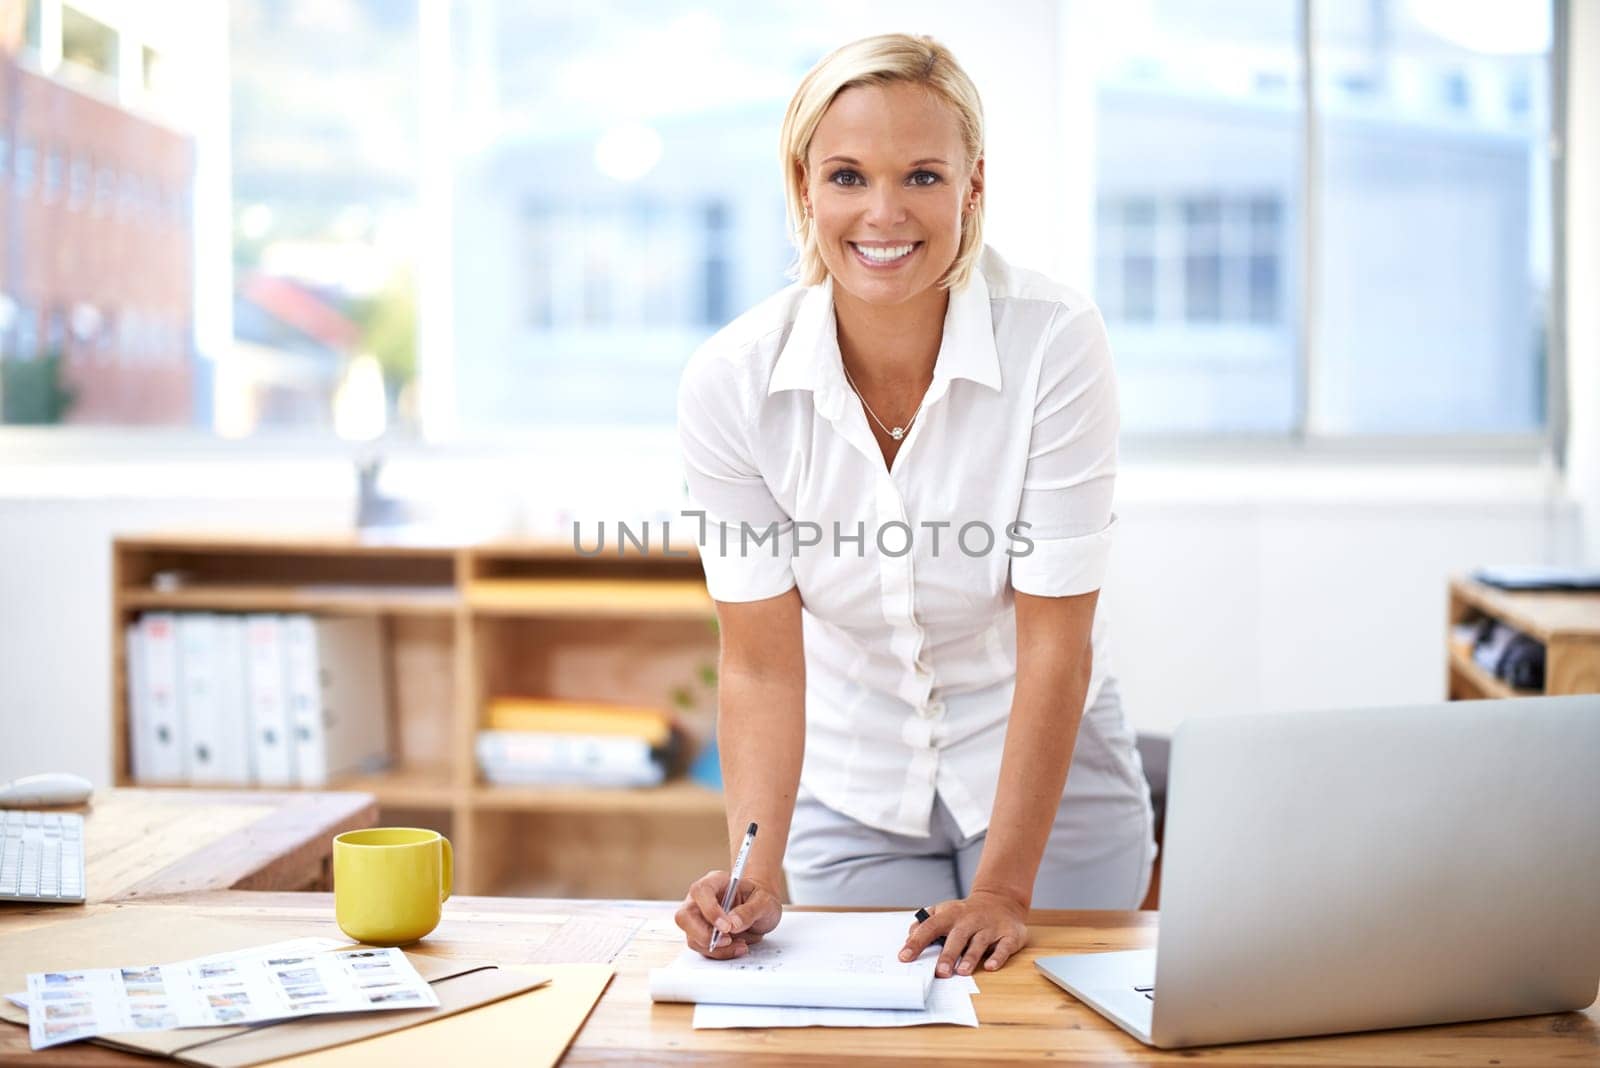 Happy, smile and portrait of a businesswoman in her office writing on paper for startup planning. Confidence, success and professional female hr manager working on a company report in the workplace